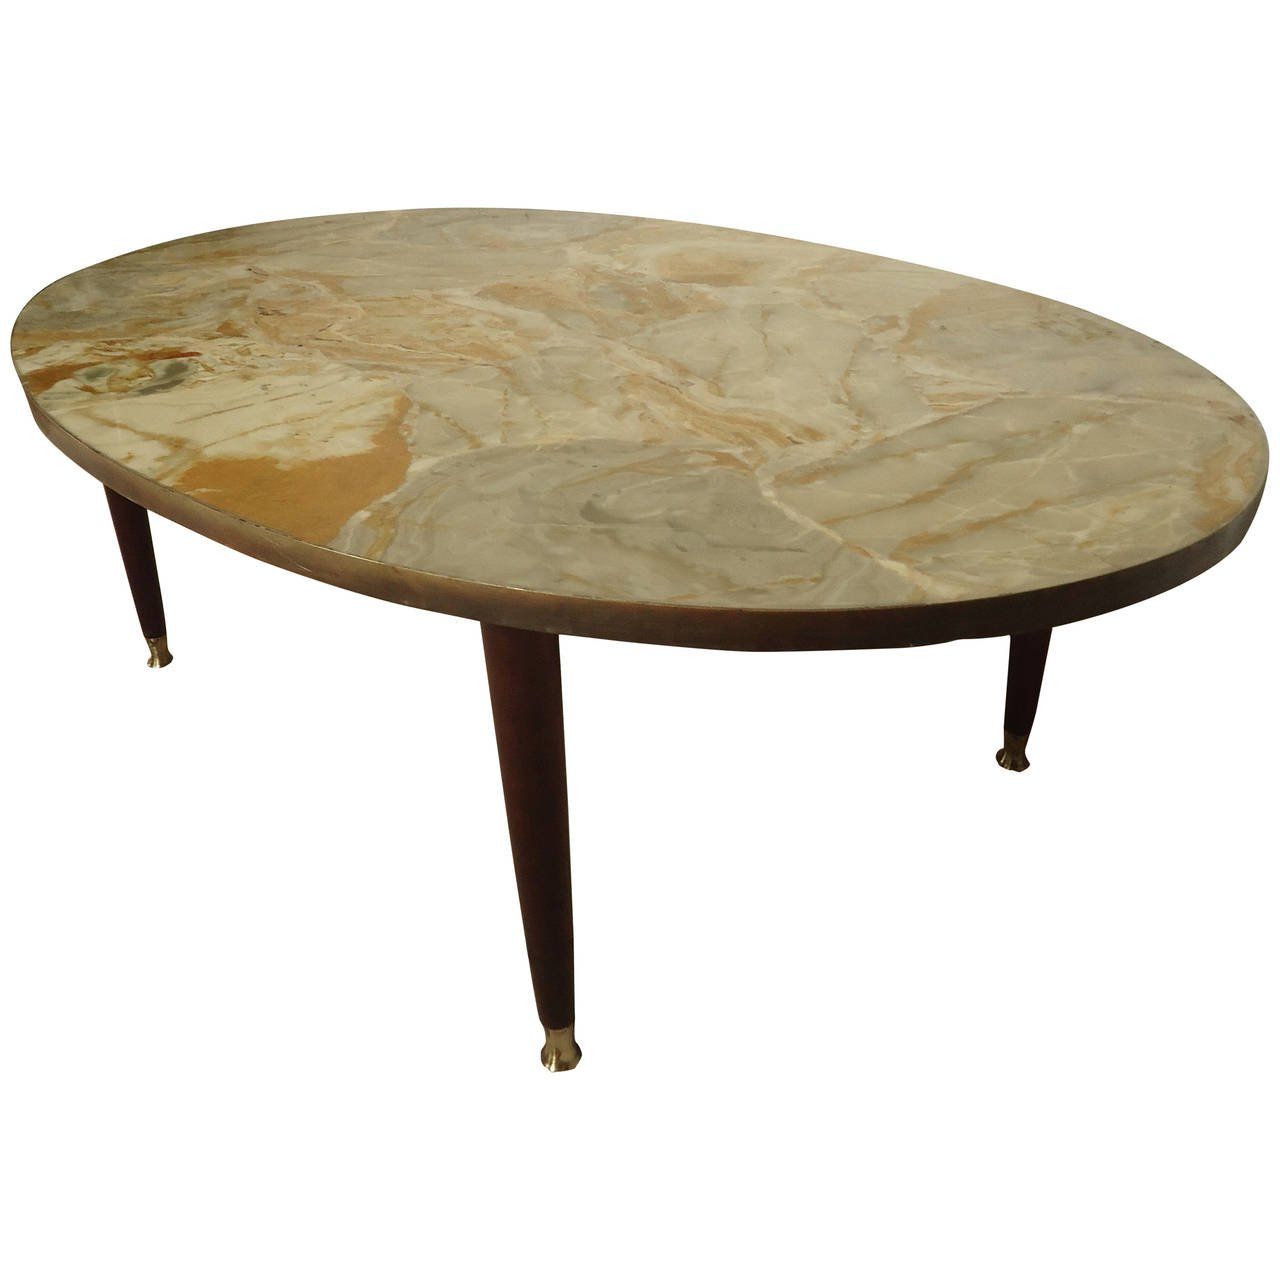 Most Recent Mid Century Modern Italian Marble Top Coffee Table For Sale At 1stdibs Regarding Mid Century Modern Marble Coffee Tables (View 1 of 20)